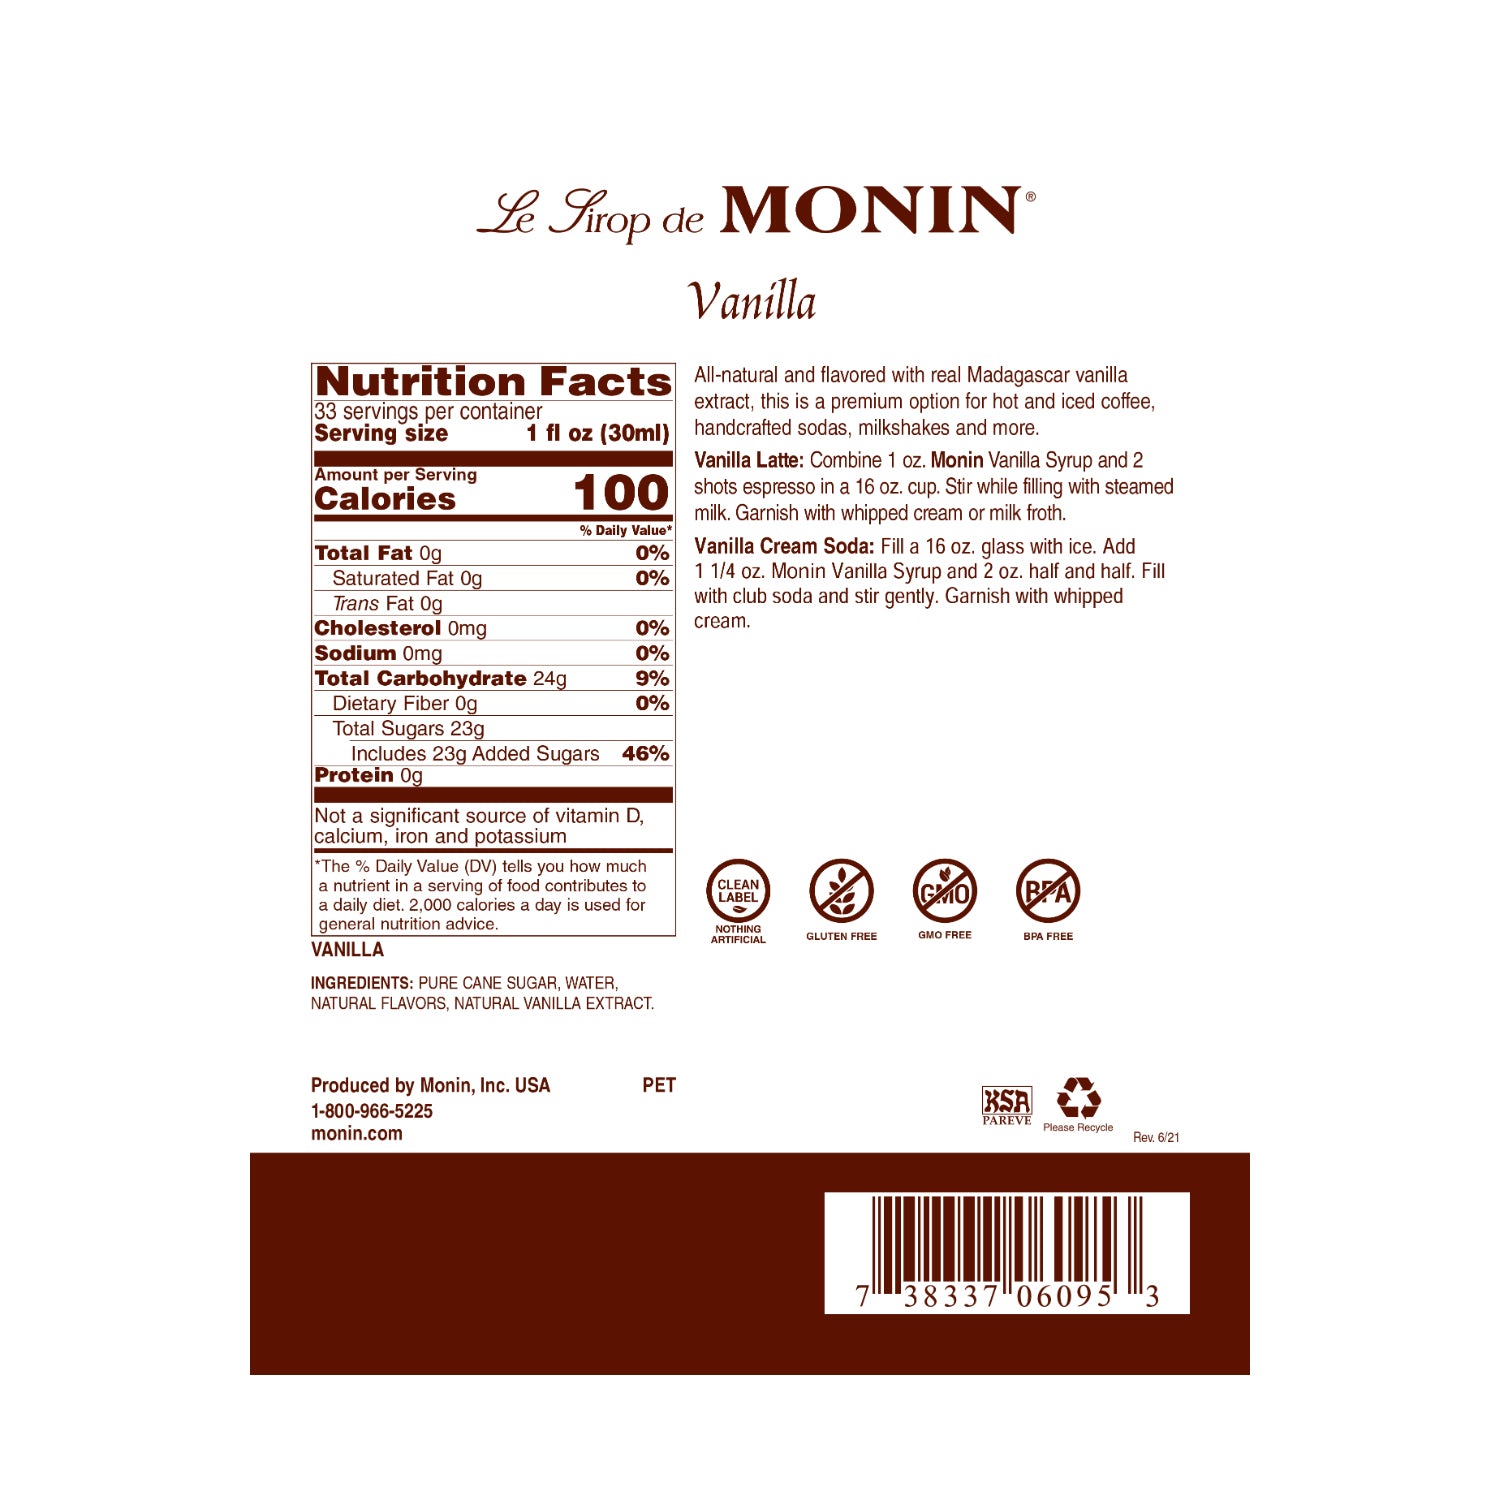 Monin Vanilla Syrup nutrition facts and recipe label